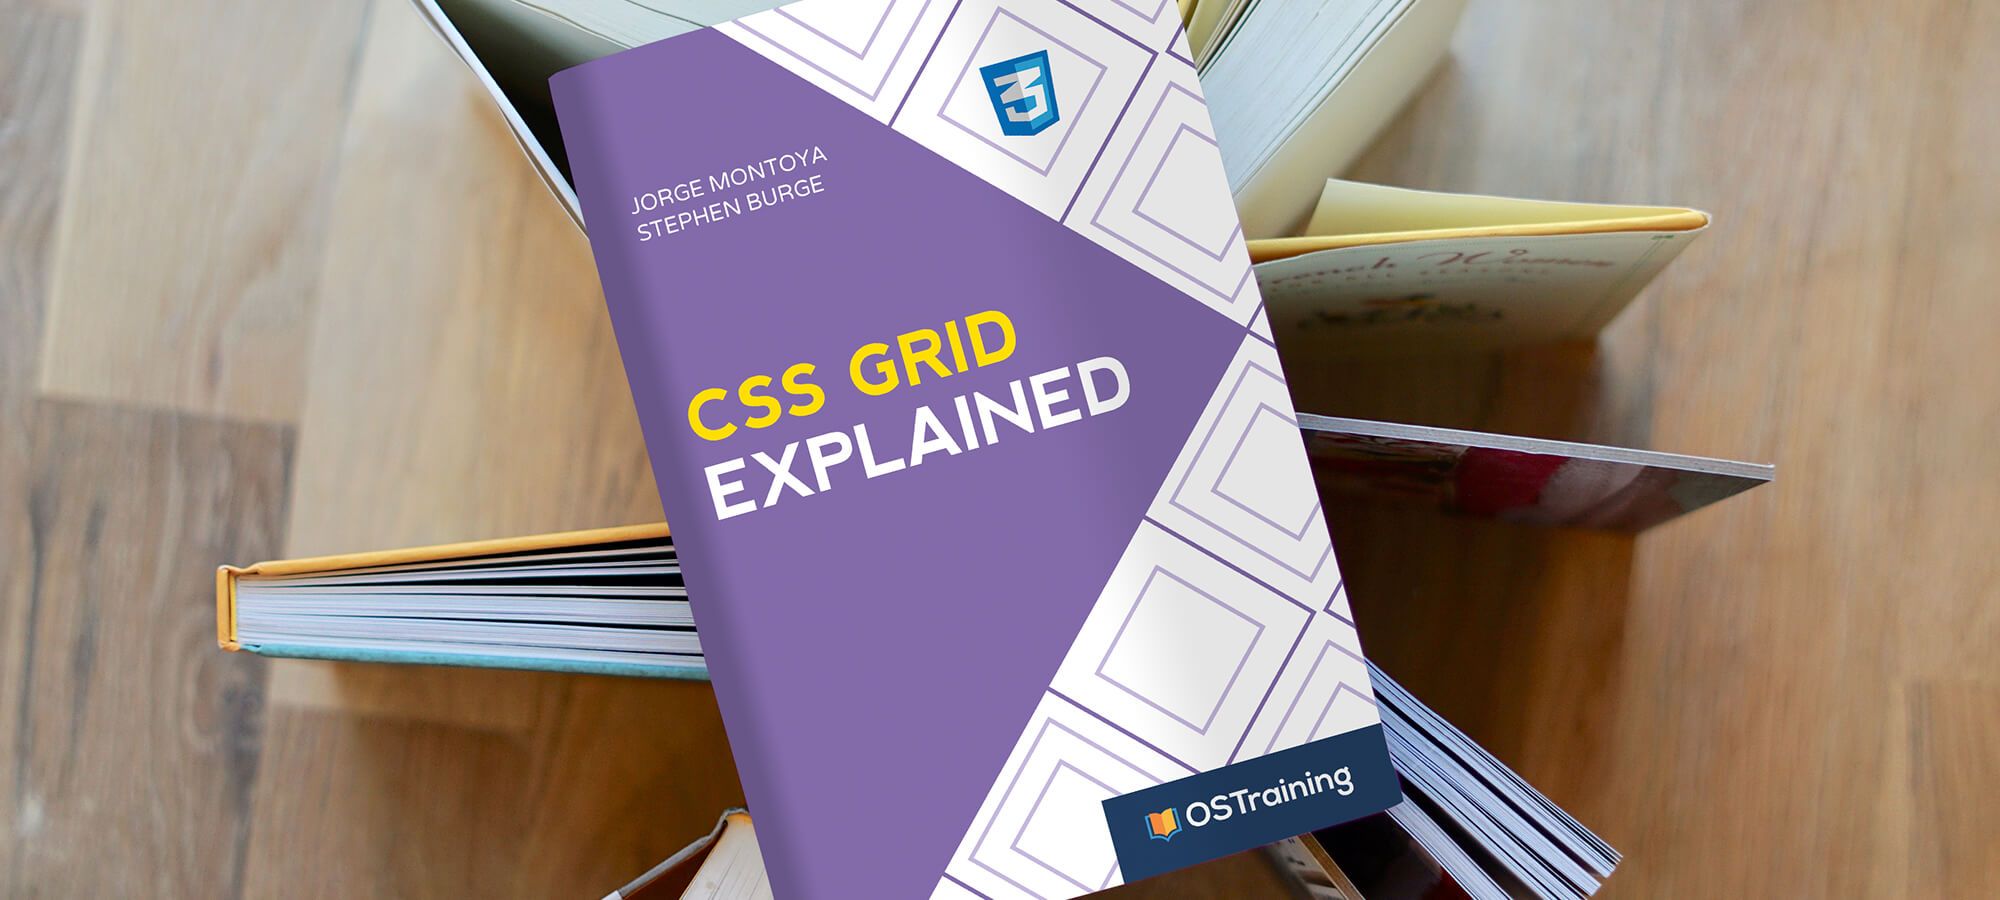 Read the CSS Grid Explained book and Get Ready for Joomla 4